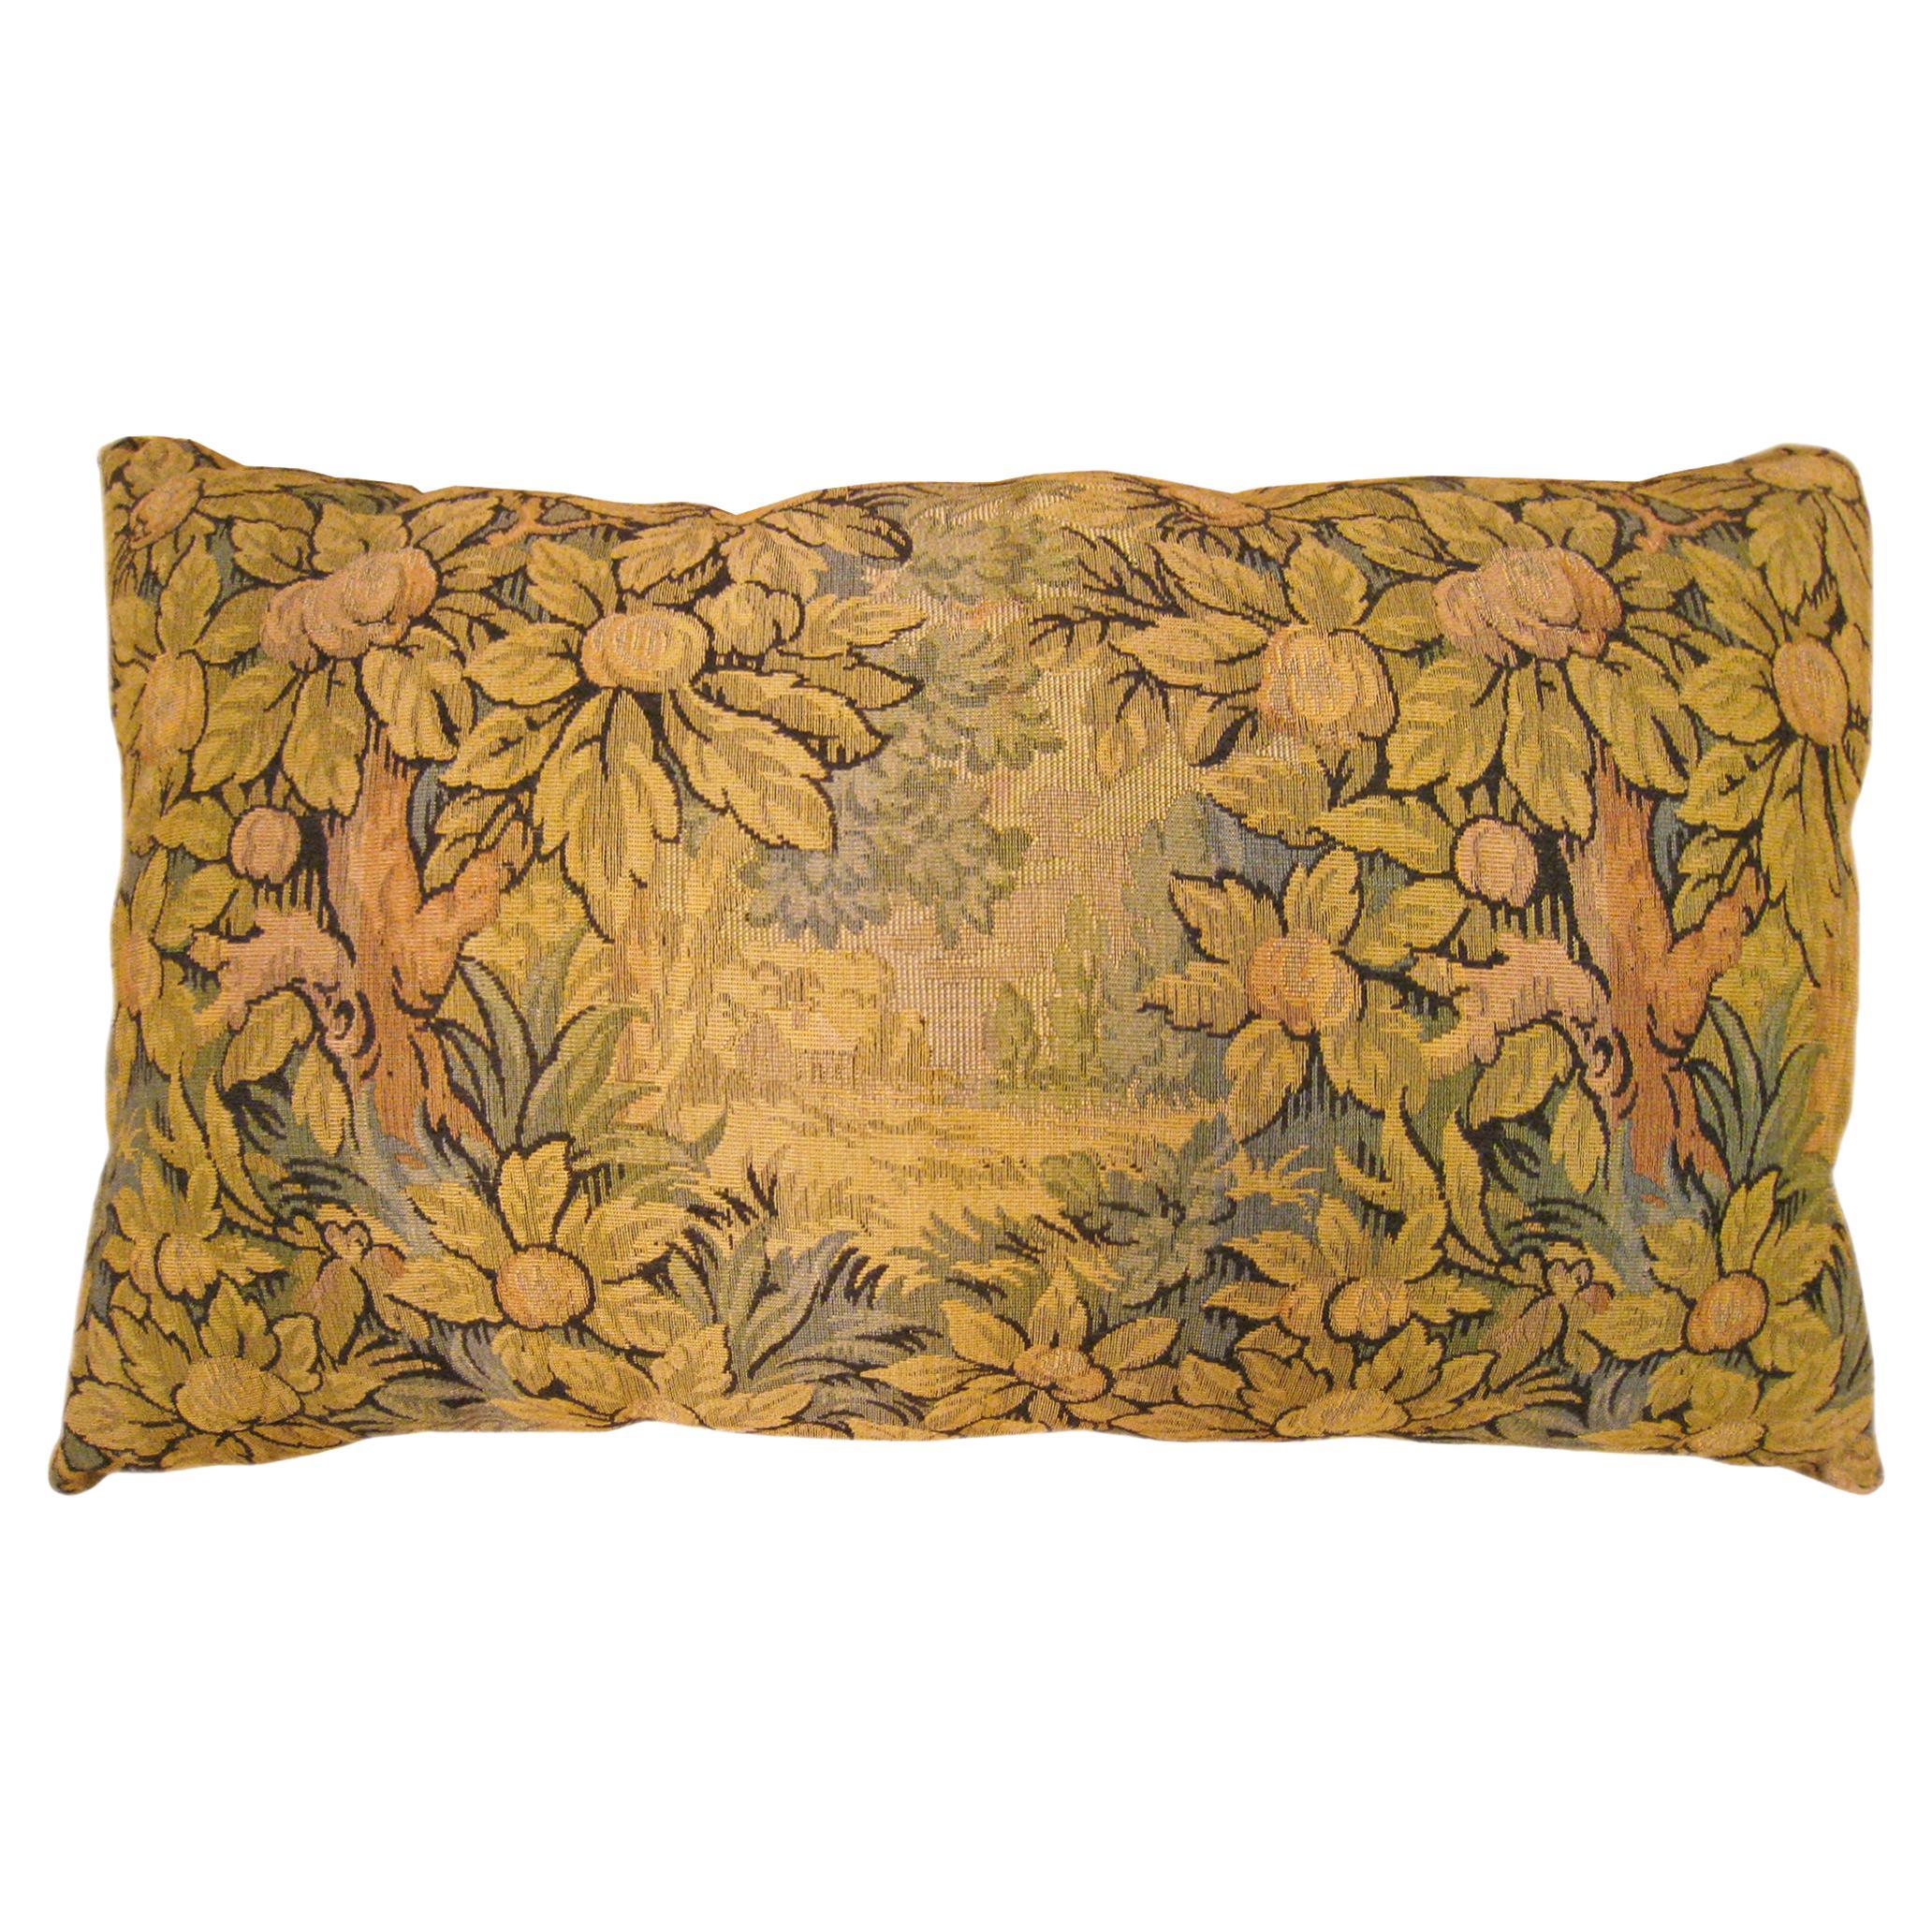 Decorative Antique Jacquard Tapestry Pillow with Trees Allover